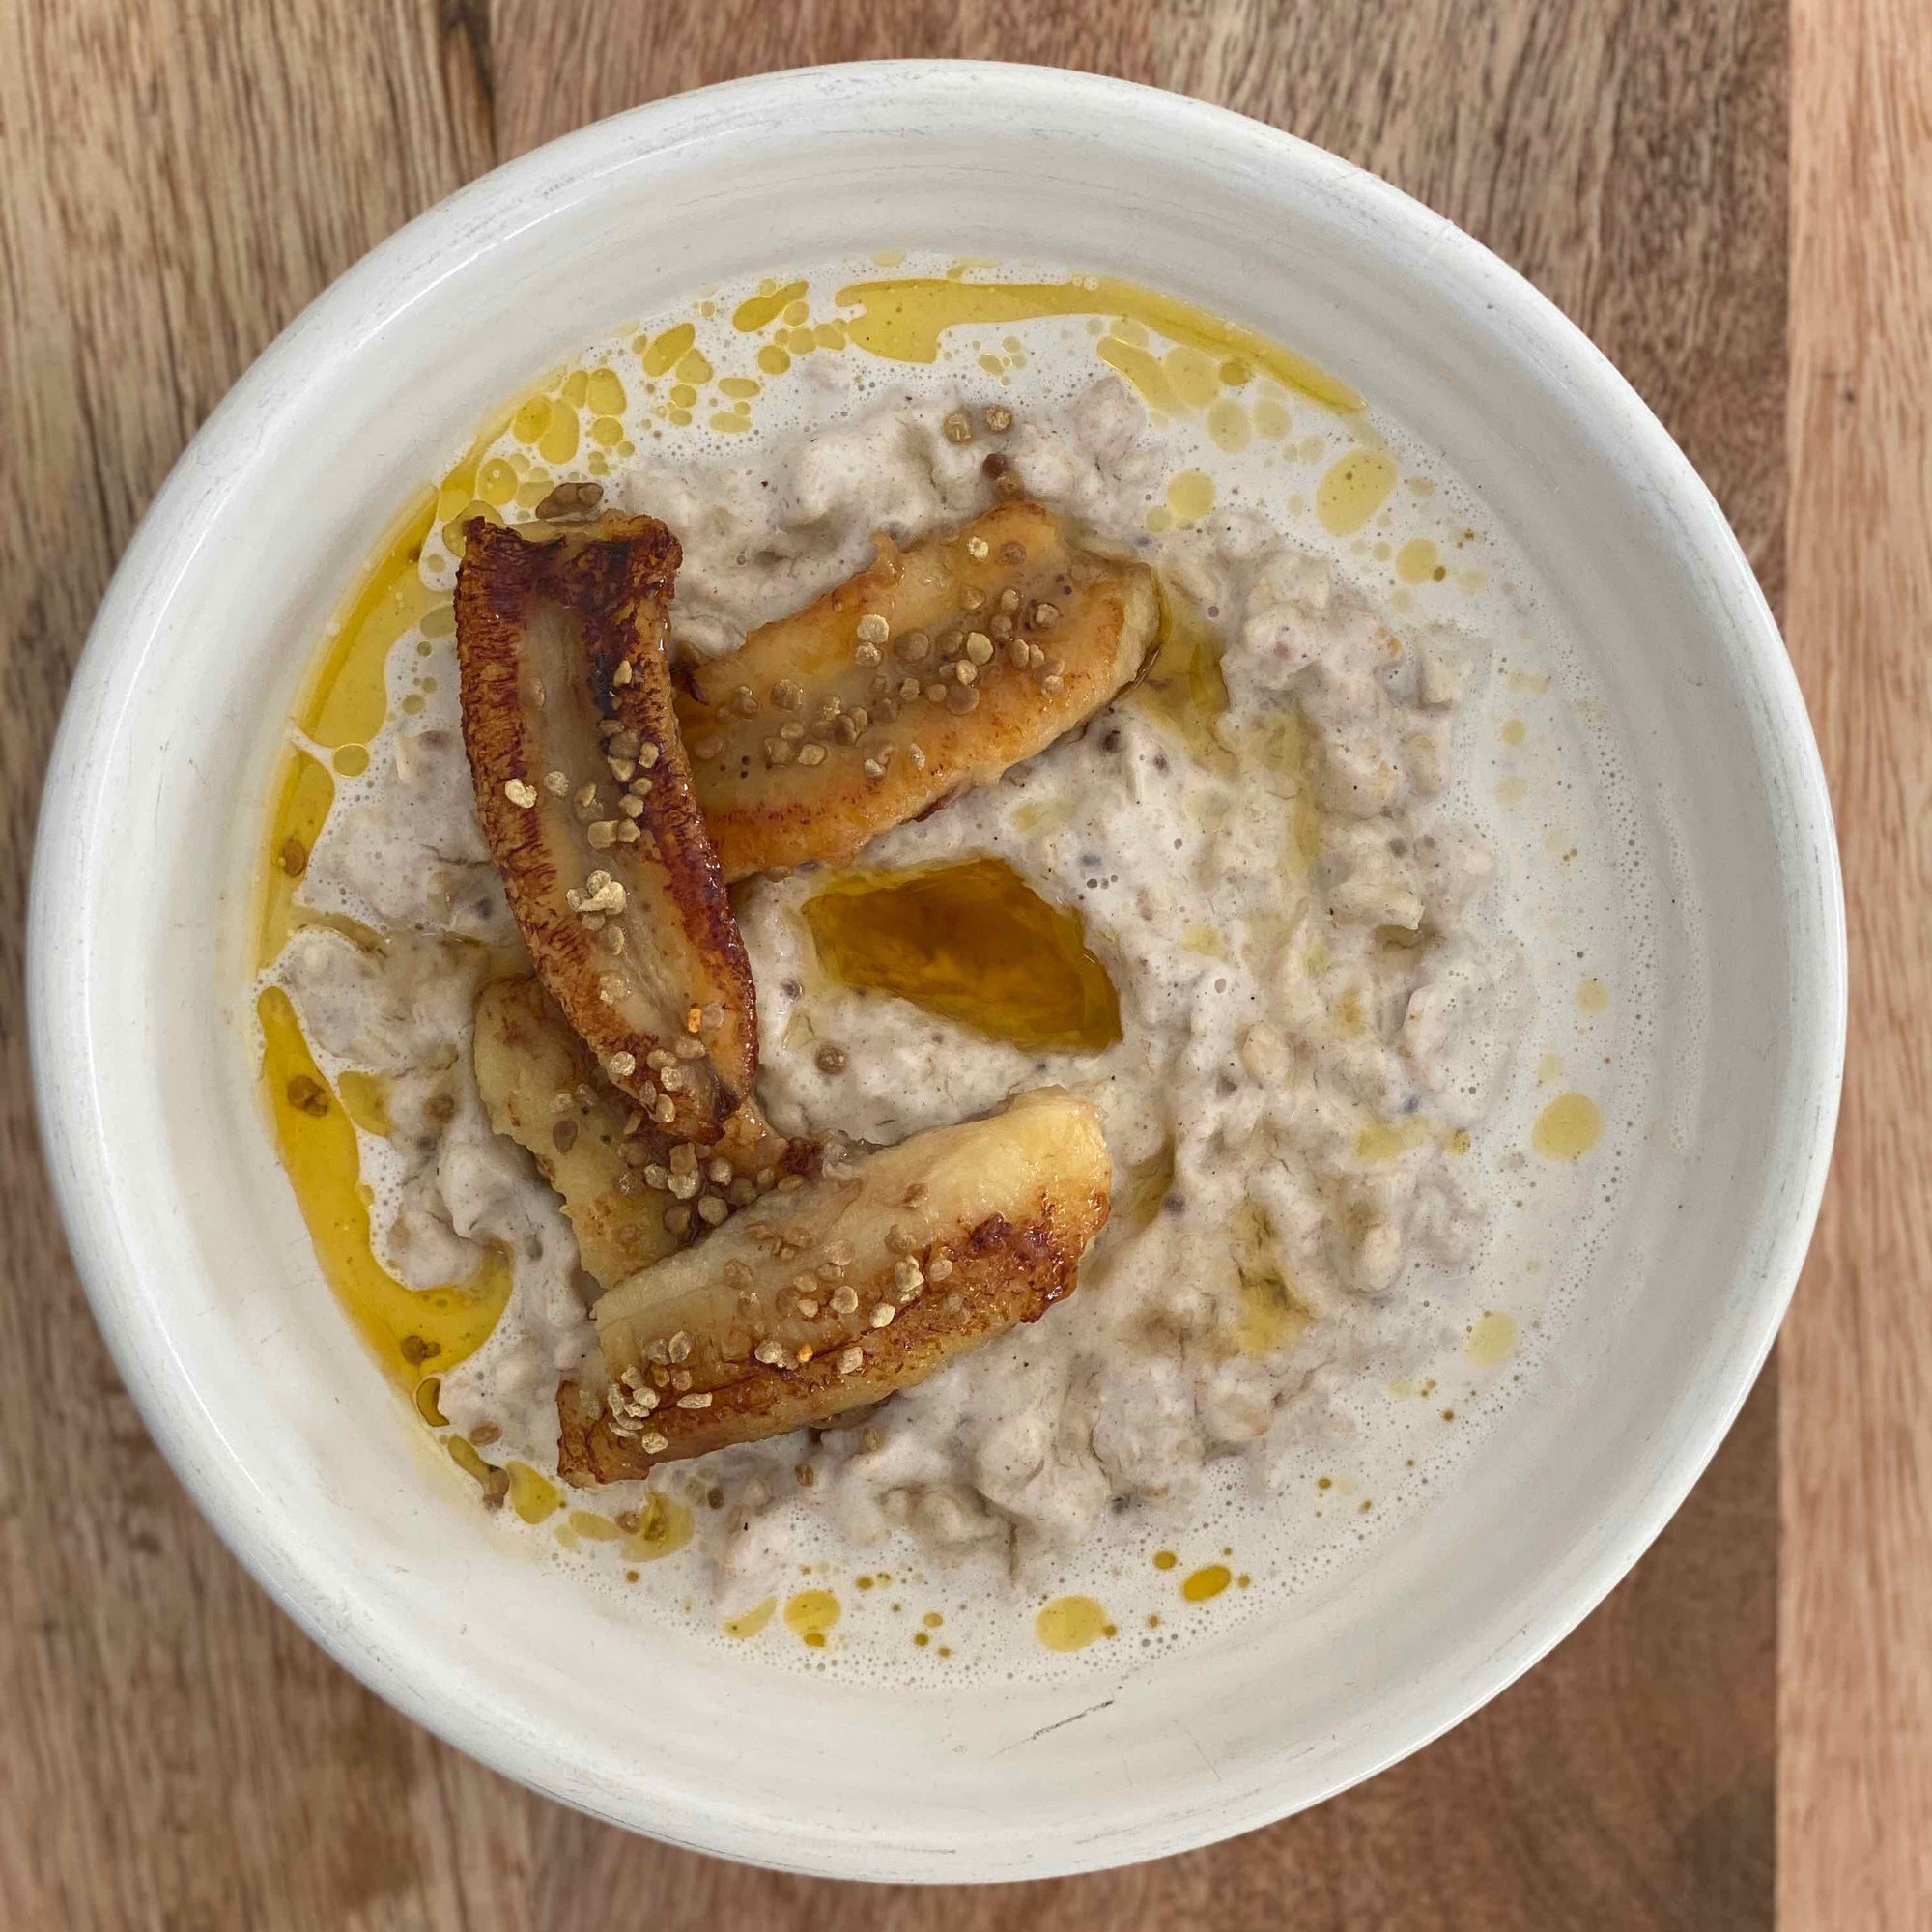 Mags’ Coconut Oats with Caramelised Bananas